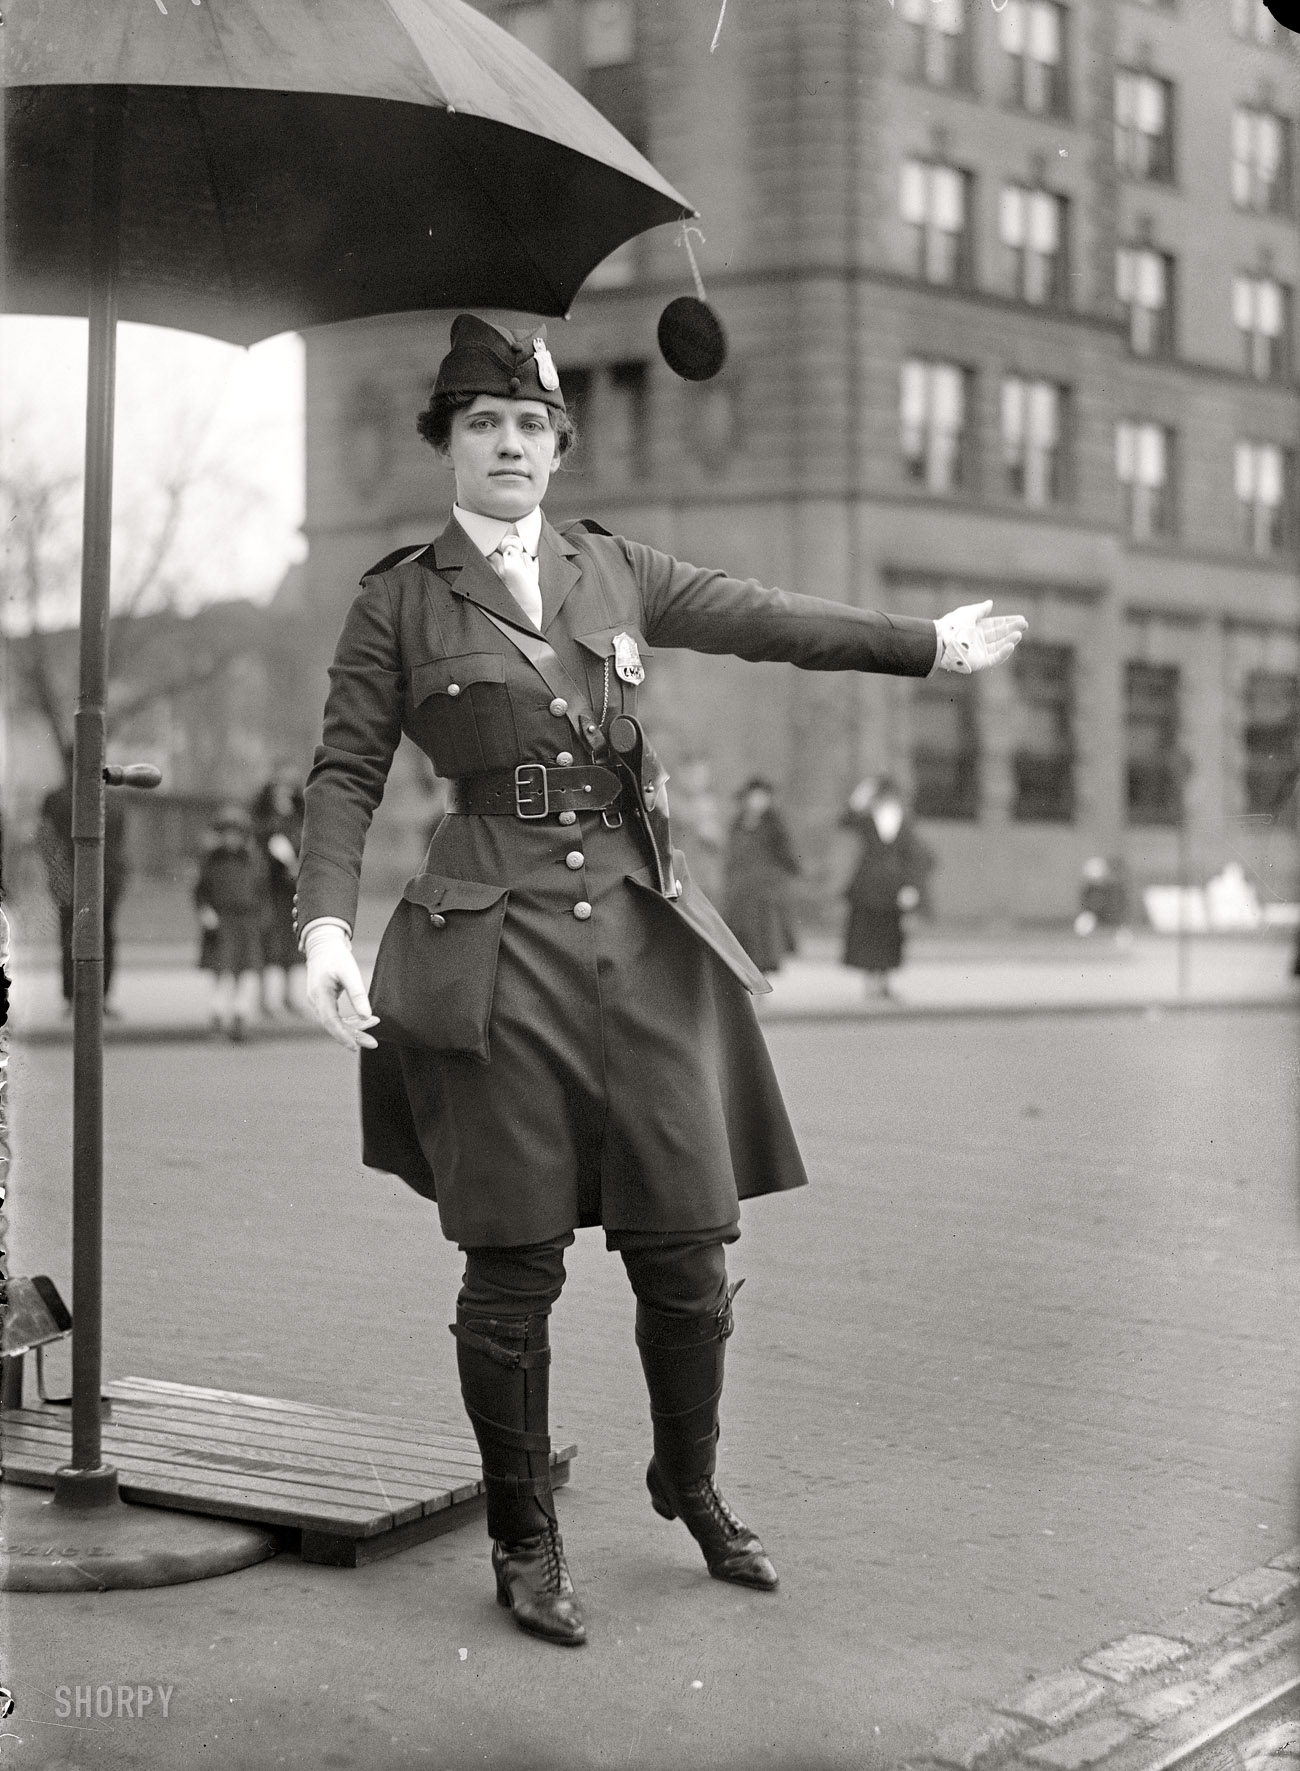 Washington, D.C., circa 1918. "Mrs. L.O. King, traffic cop." Badge 432, where are you? Harris & Ewing Collection glass negative. View full size.